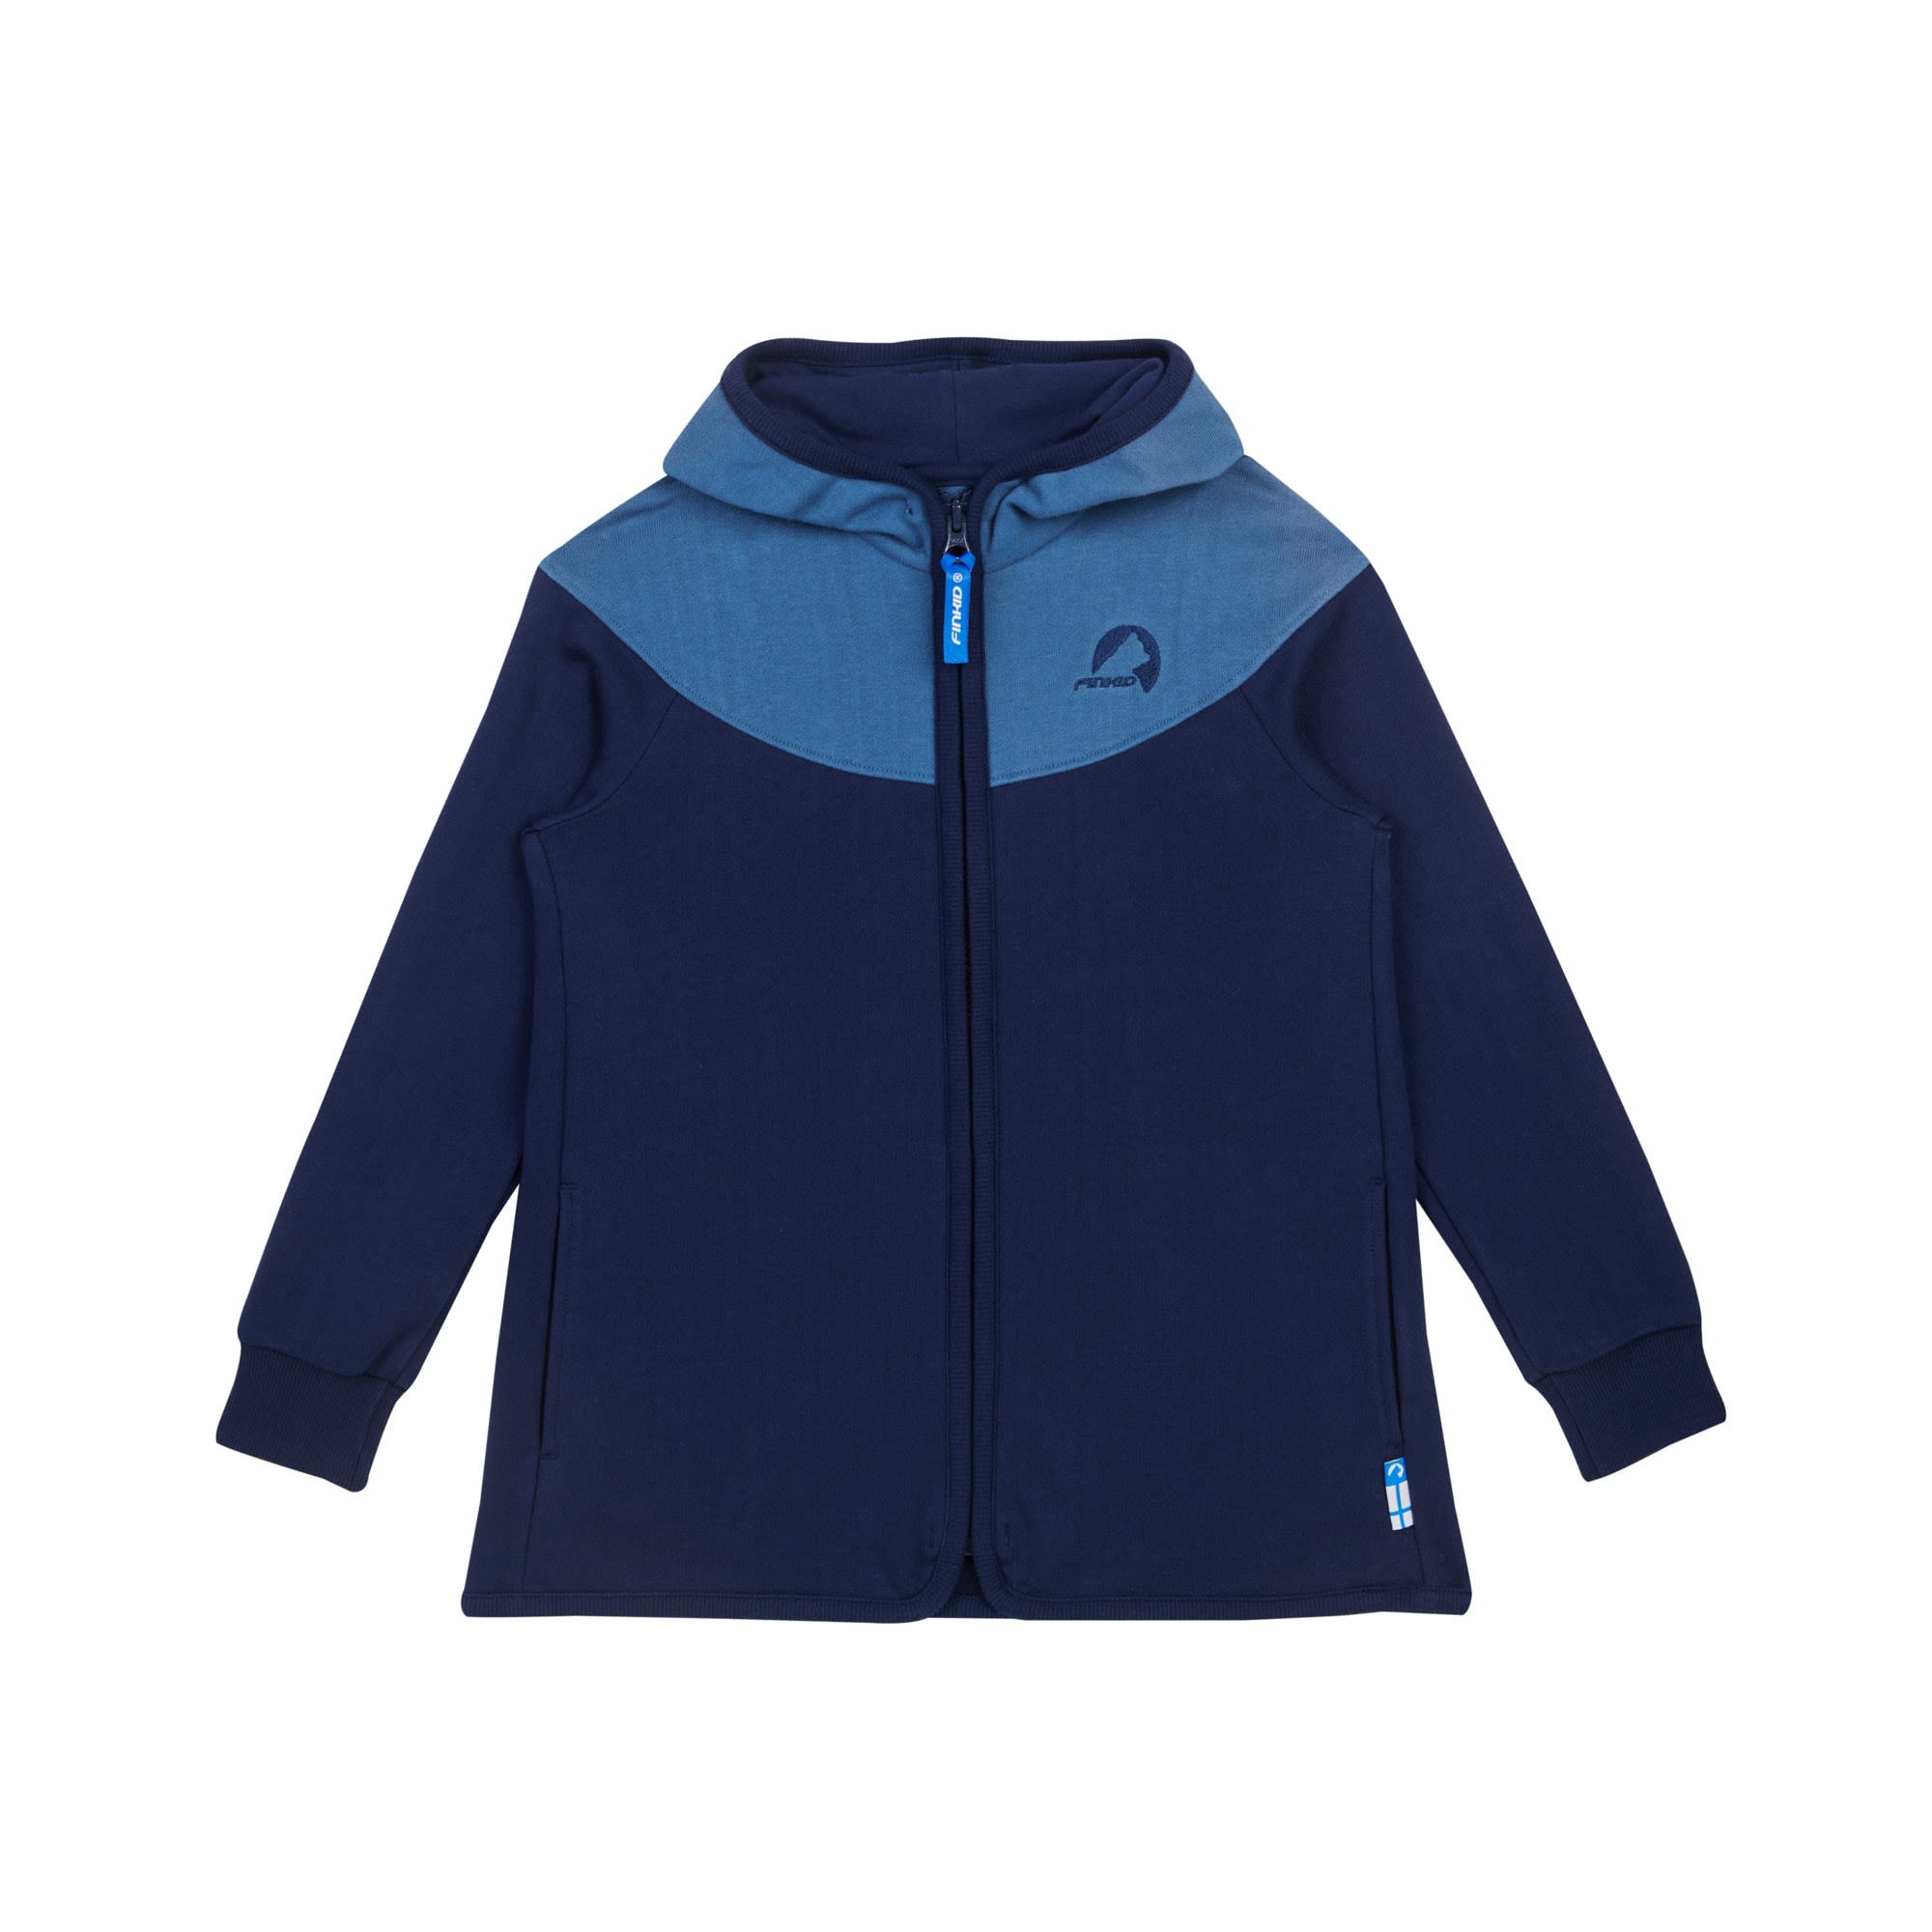 Finkid Girls Jallo Colorblock - Blau- Female Anoraks- Grsse 80 - 90 - Farbe Real Teal - Navy